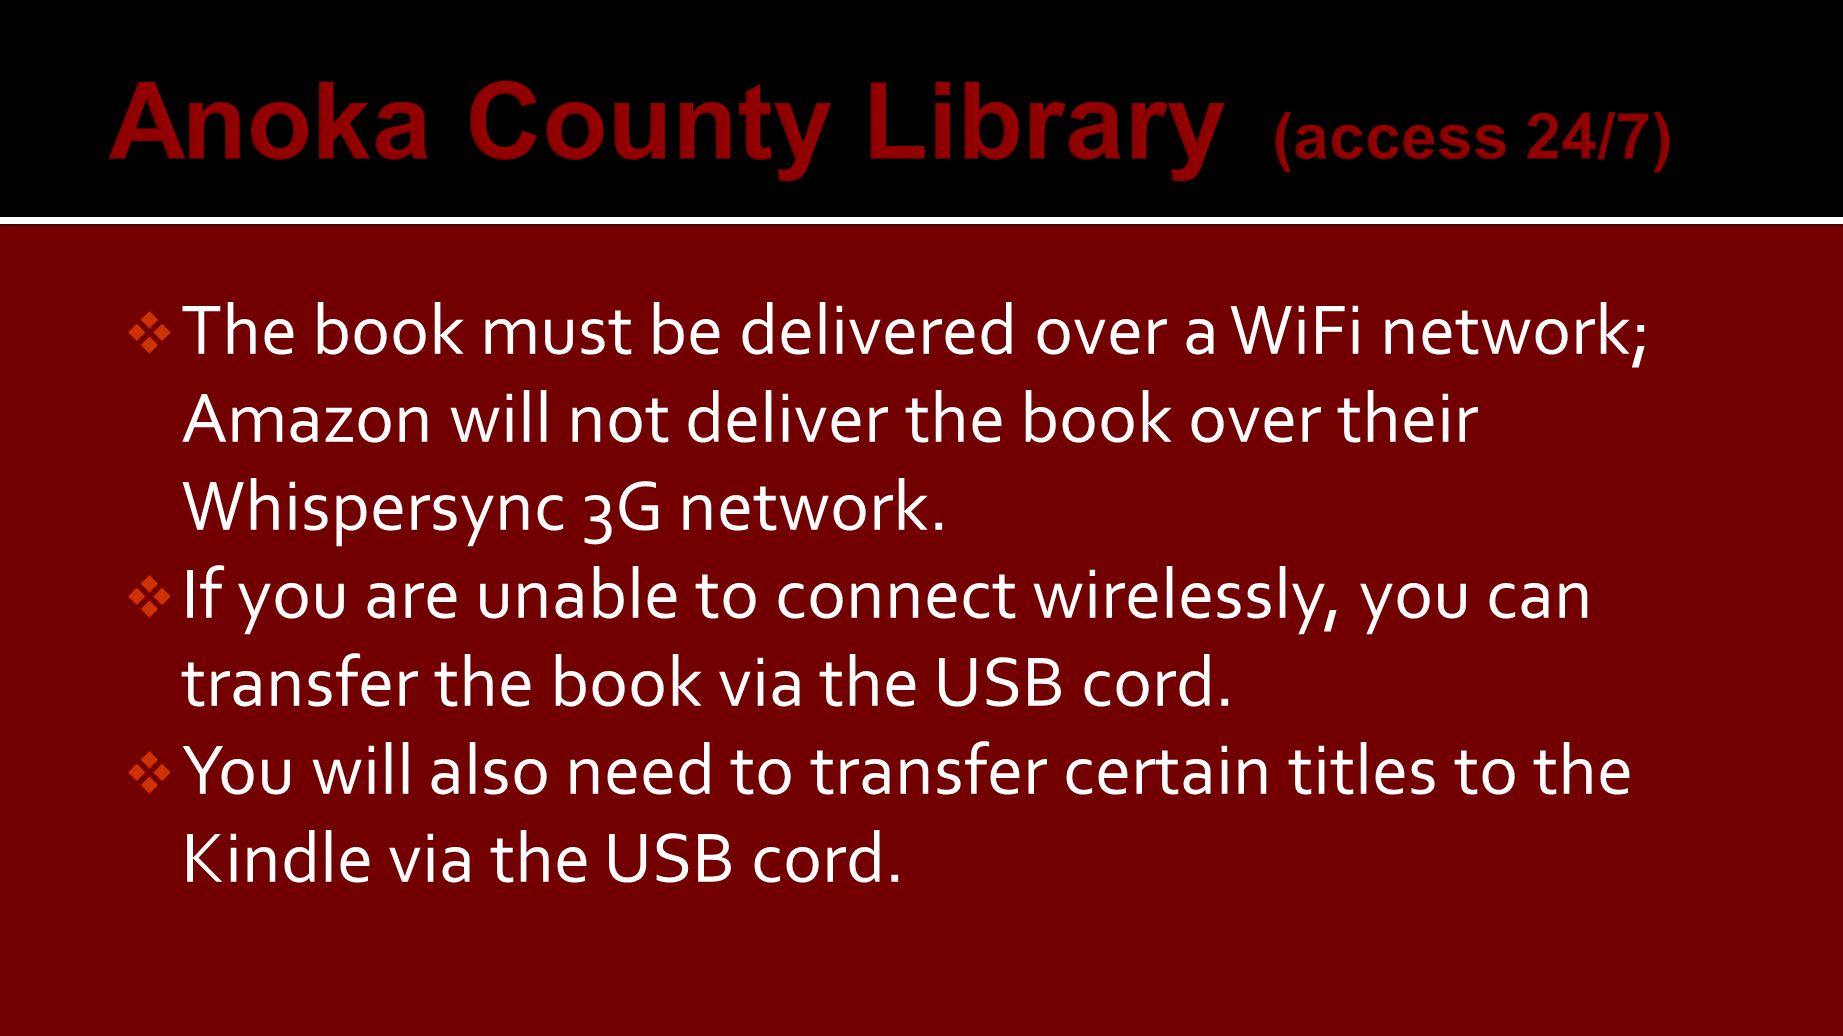  The book must be delivered over a WiFi network; Amazon will not deliver the book over their Whispersync 3G network.